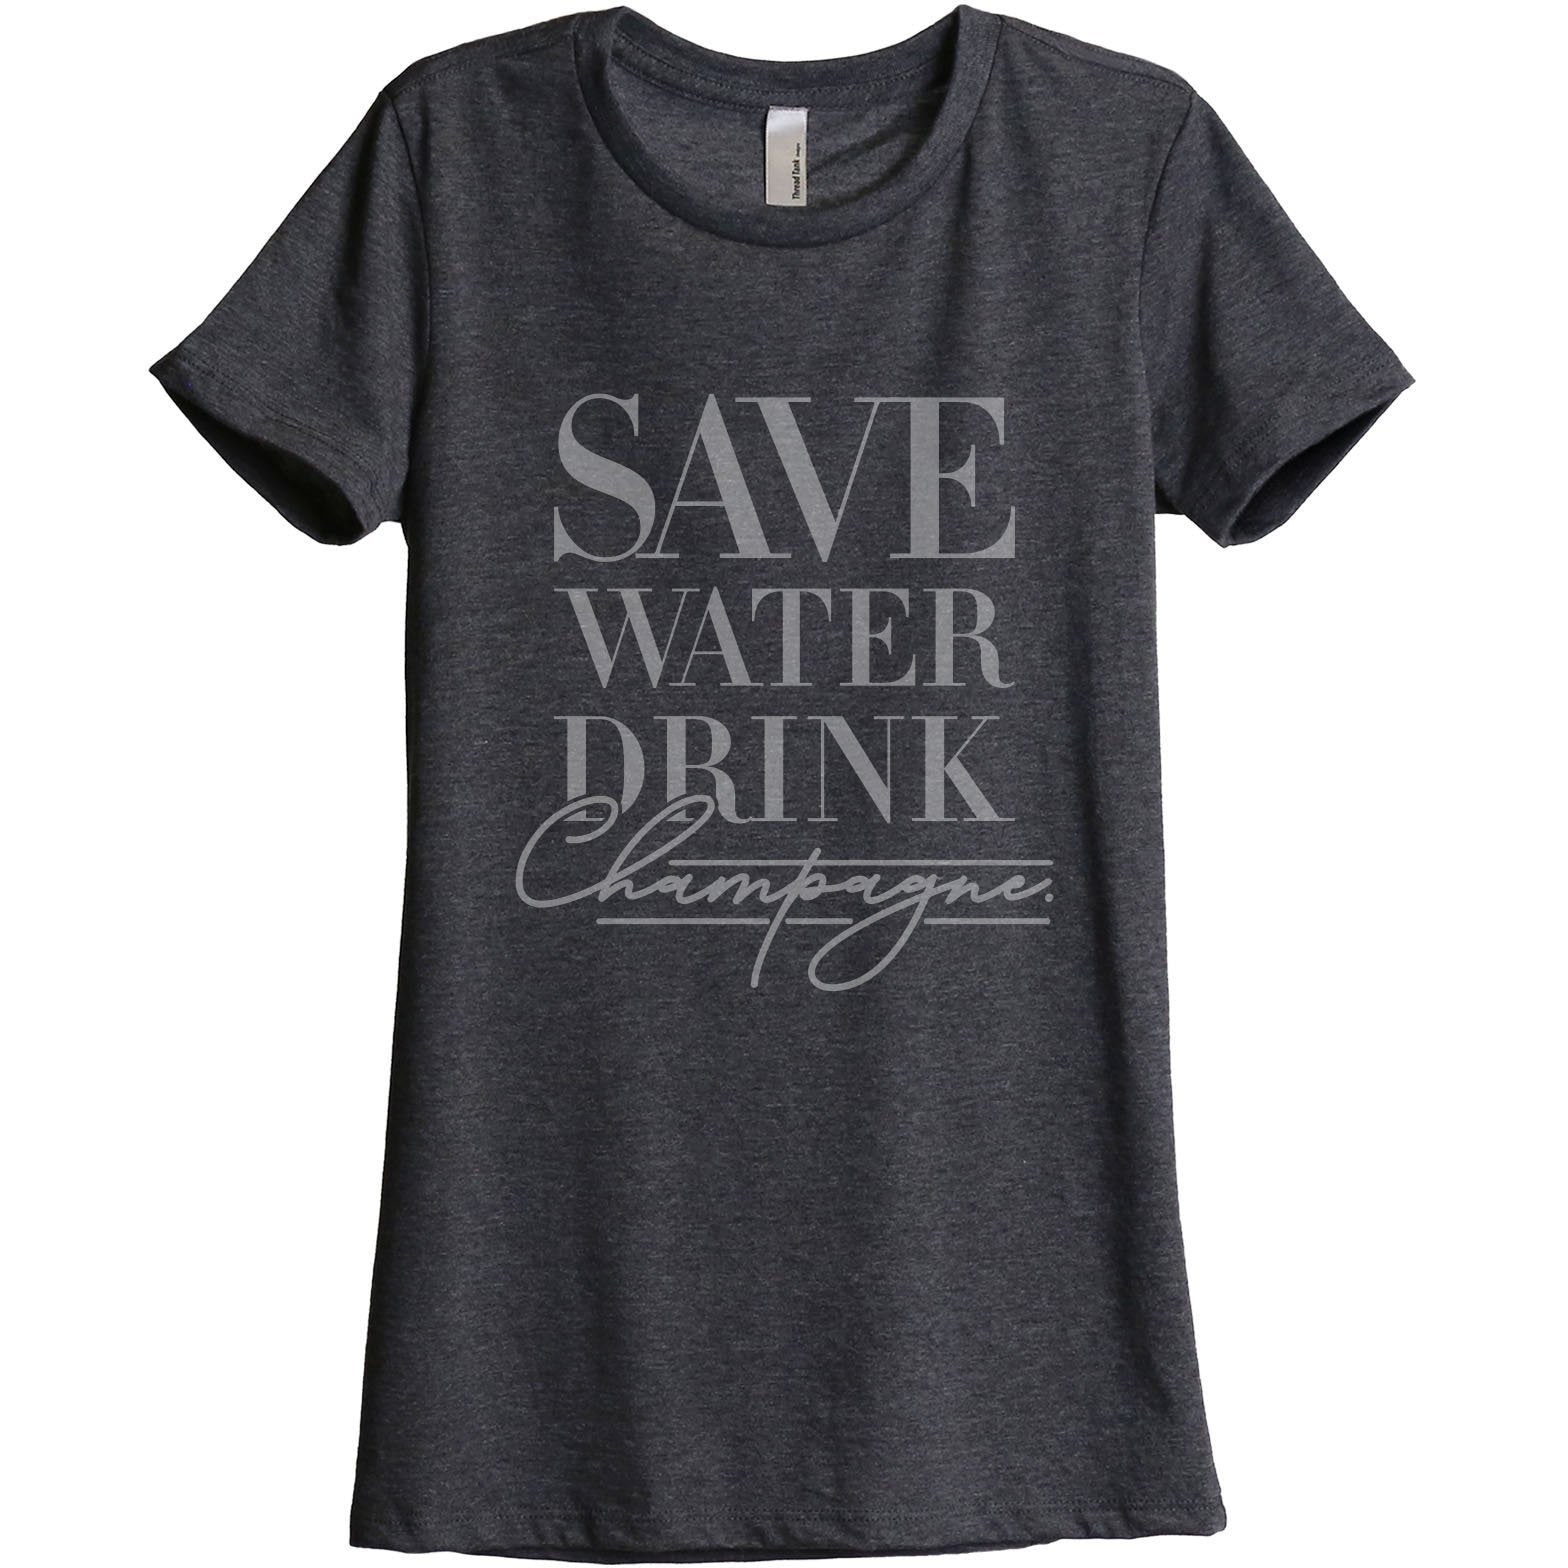 Save Water Drink Champagne Women's Relaxed Crewneck T-Shirt Top Tee Charcoal Grey
